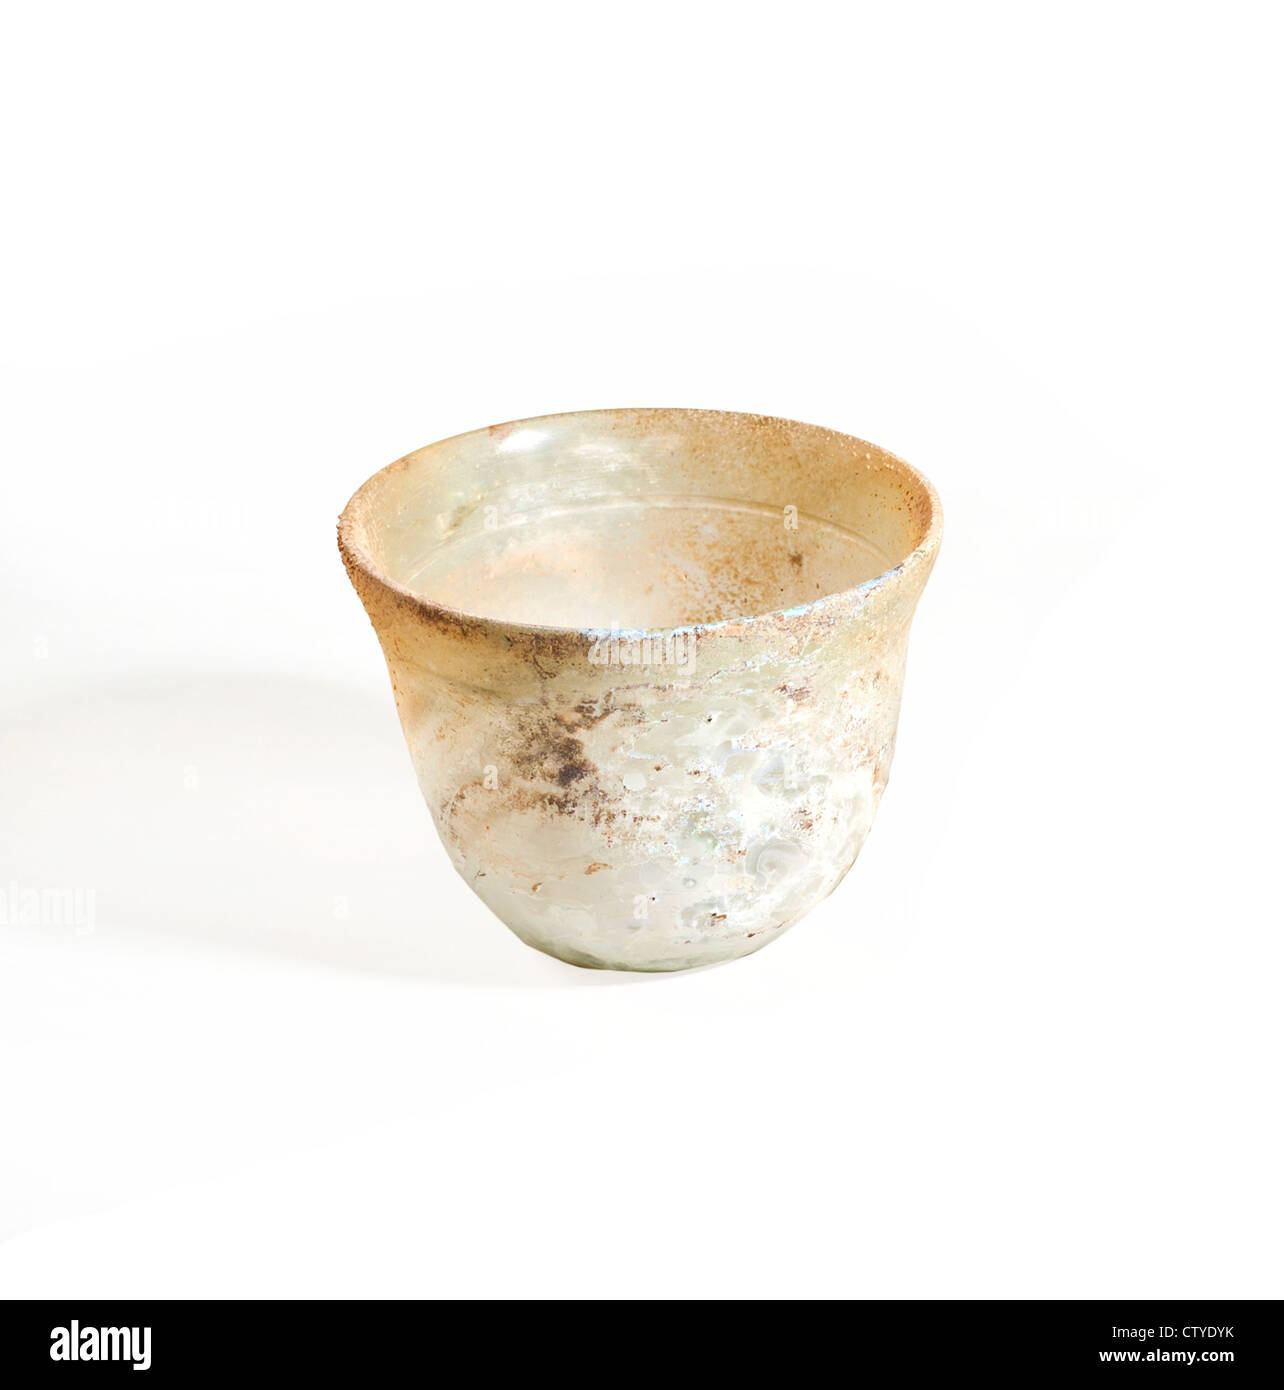 Early Roman or Hellenistic glass container first century BCE Stock Photo